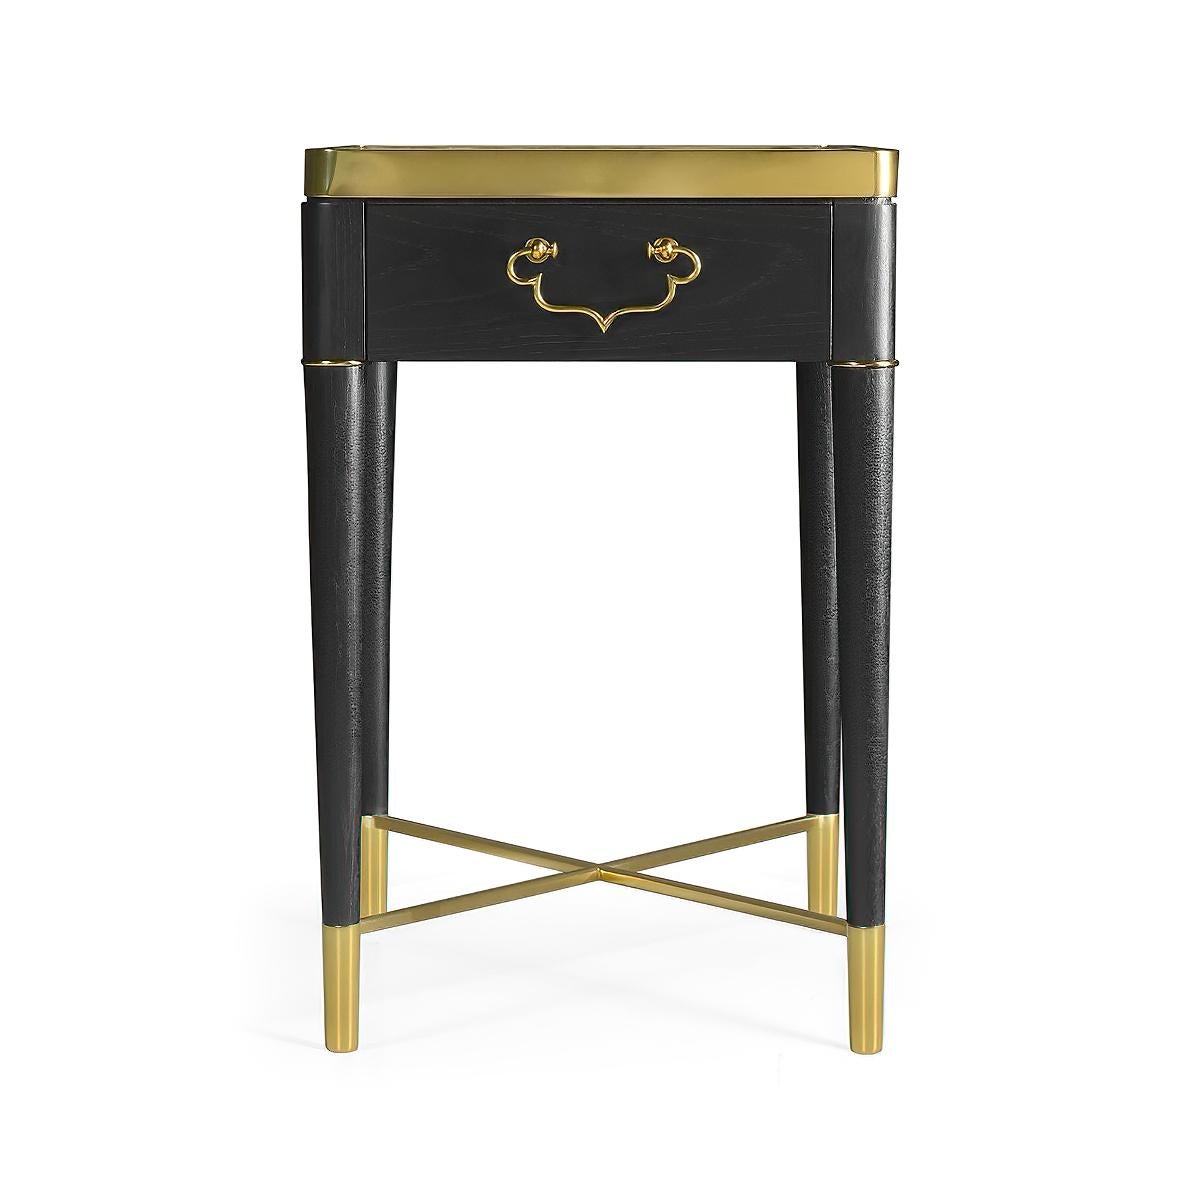 A French Mid-Century Modern style marble top side table with brass trim and hardware and an ebonized oak frame, with a single front drawer on turned and tapered legs joined by a brass X stretcher.

Dimensions: 18.25